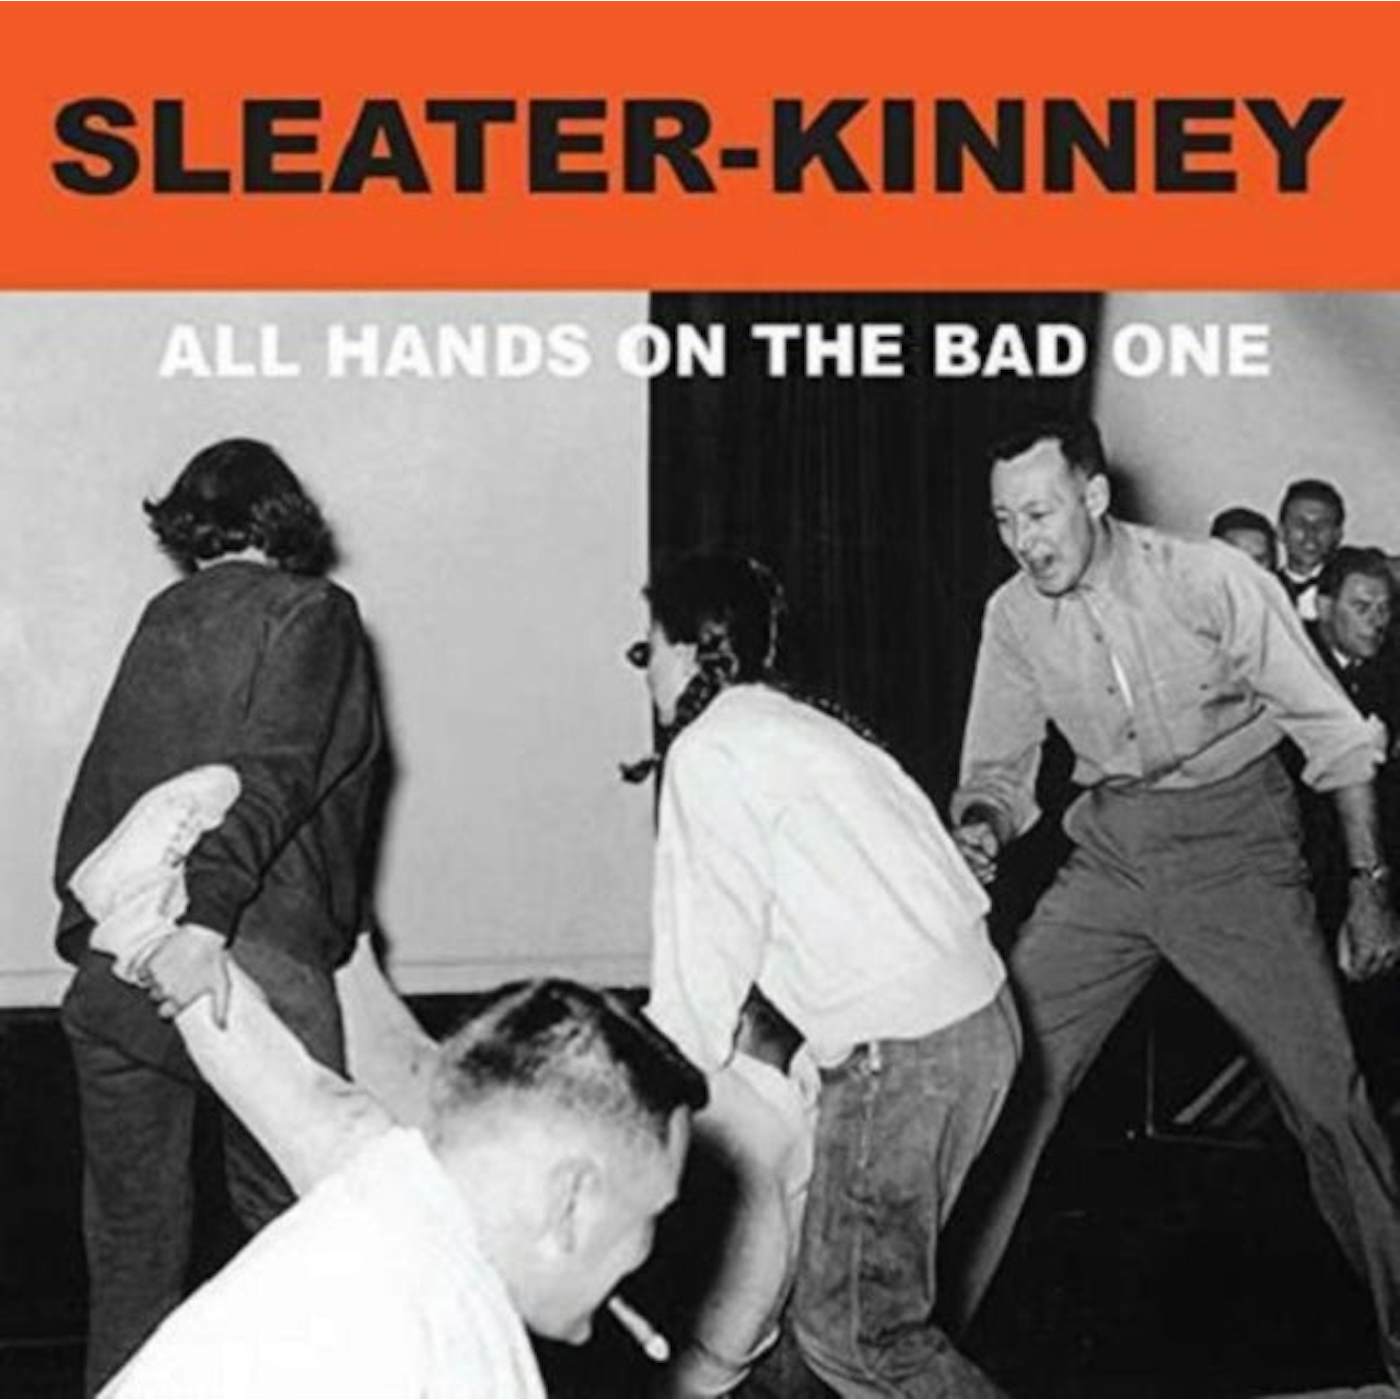 Sleater-Kinney LP Vinyl Record - All Hands On The Bad One